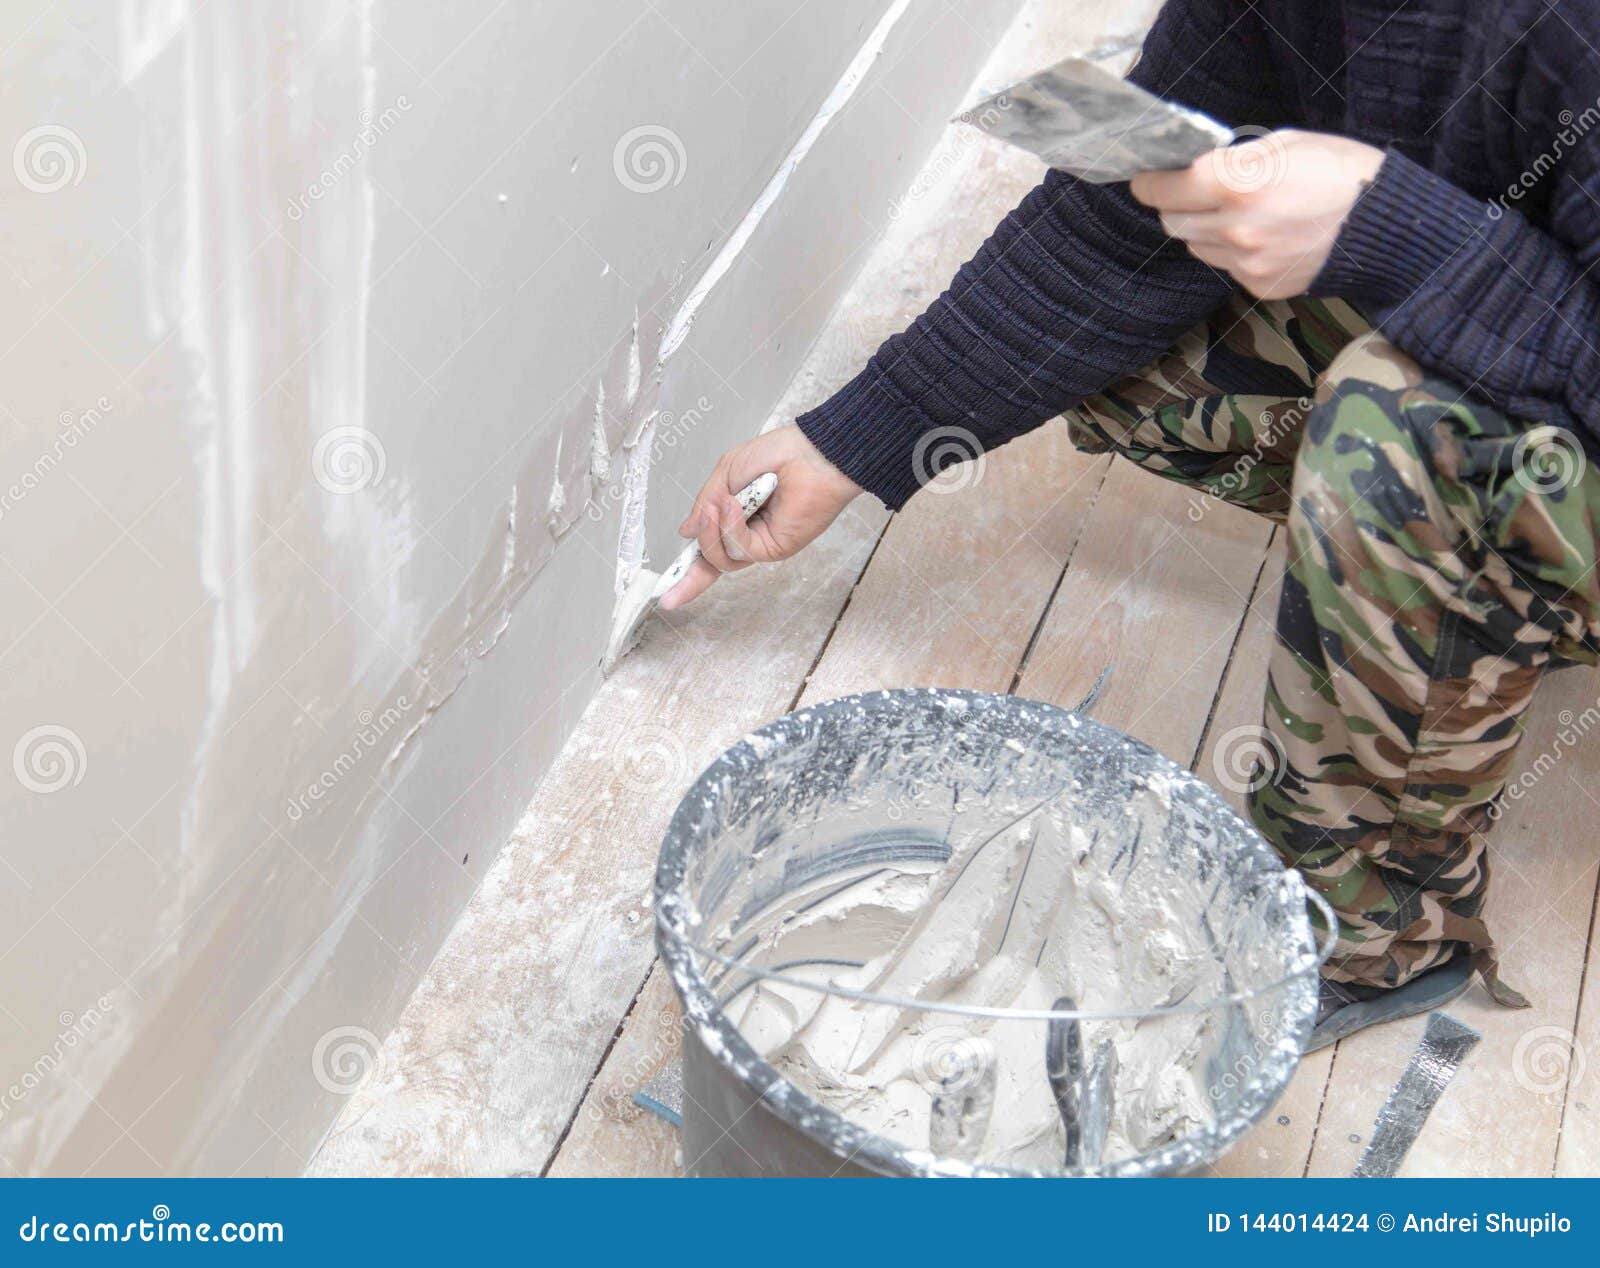 Worker Aligns The Walls With Plaster Repair In The House